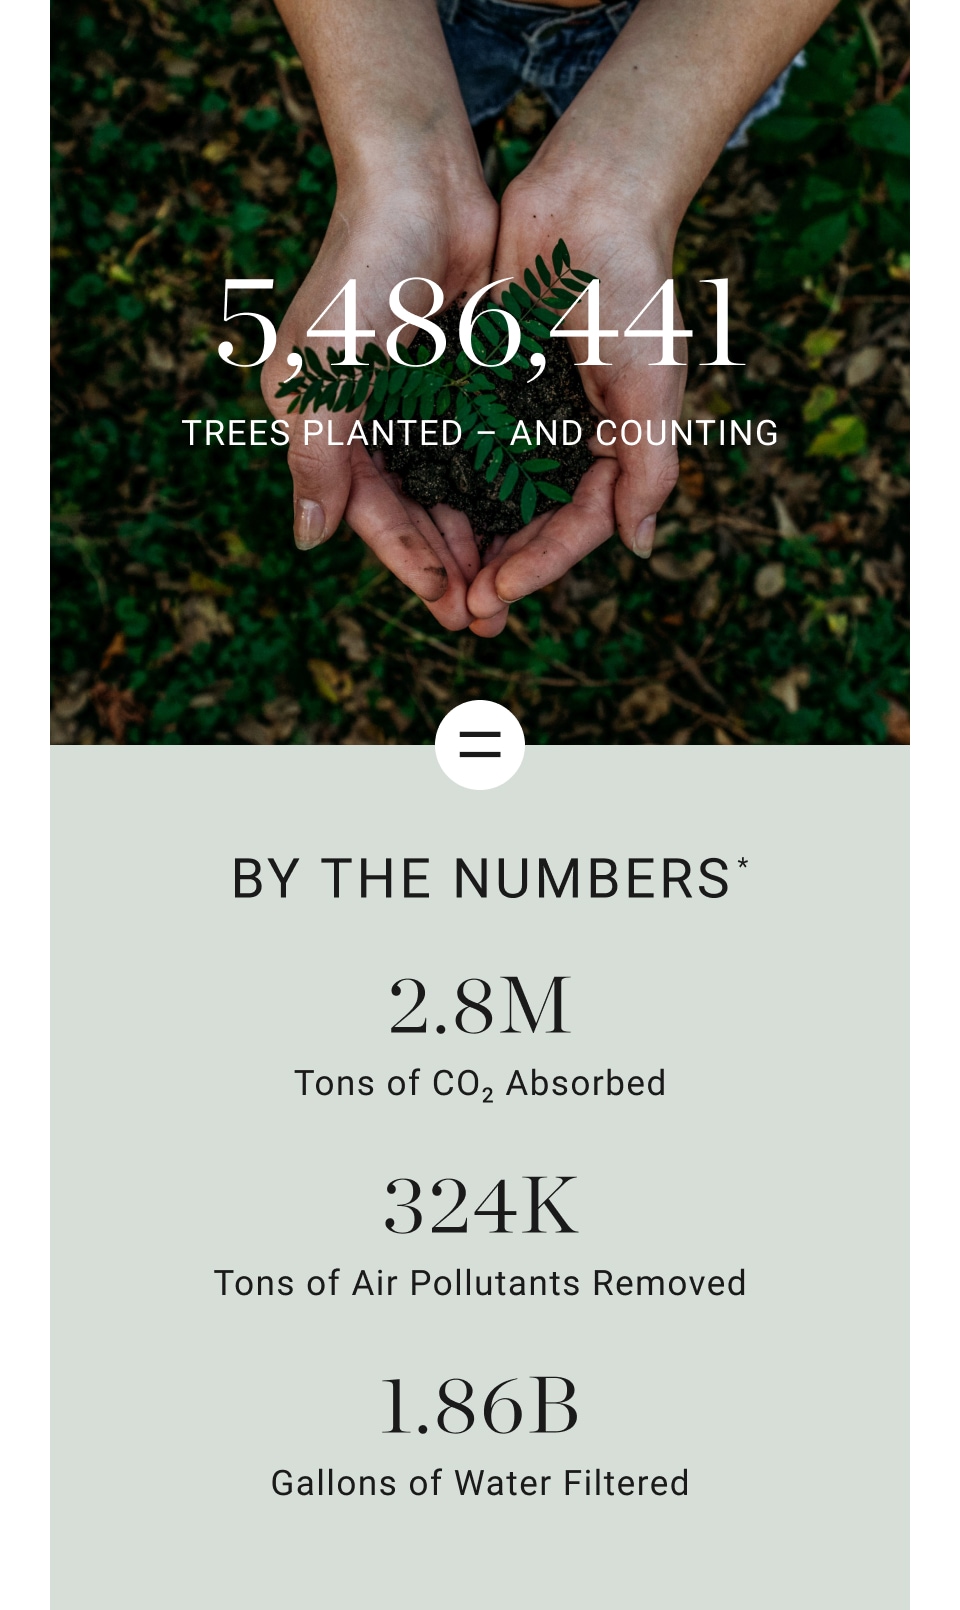 3,344,289 Trees planted - and counting